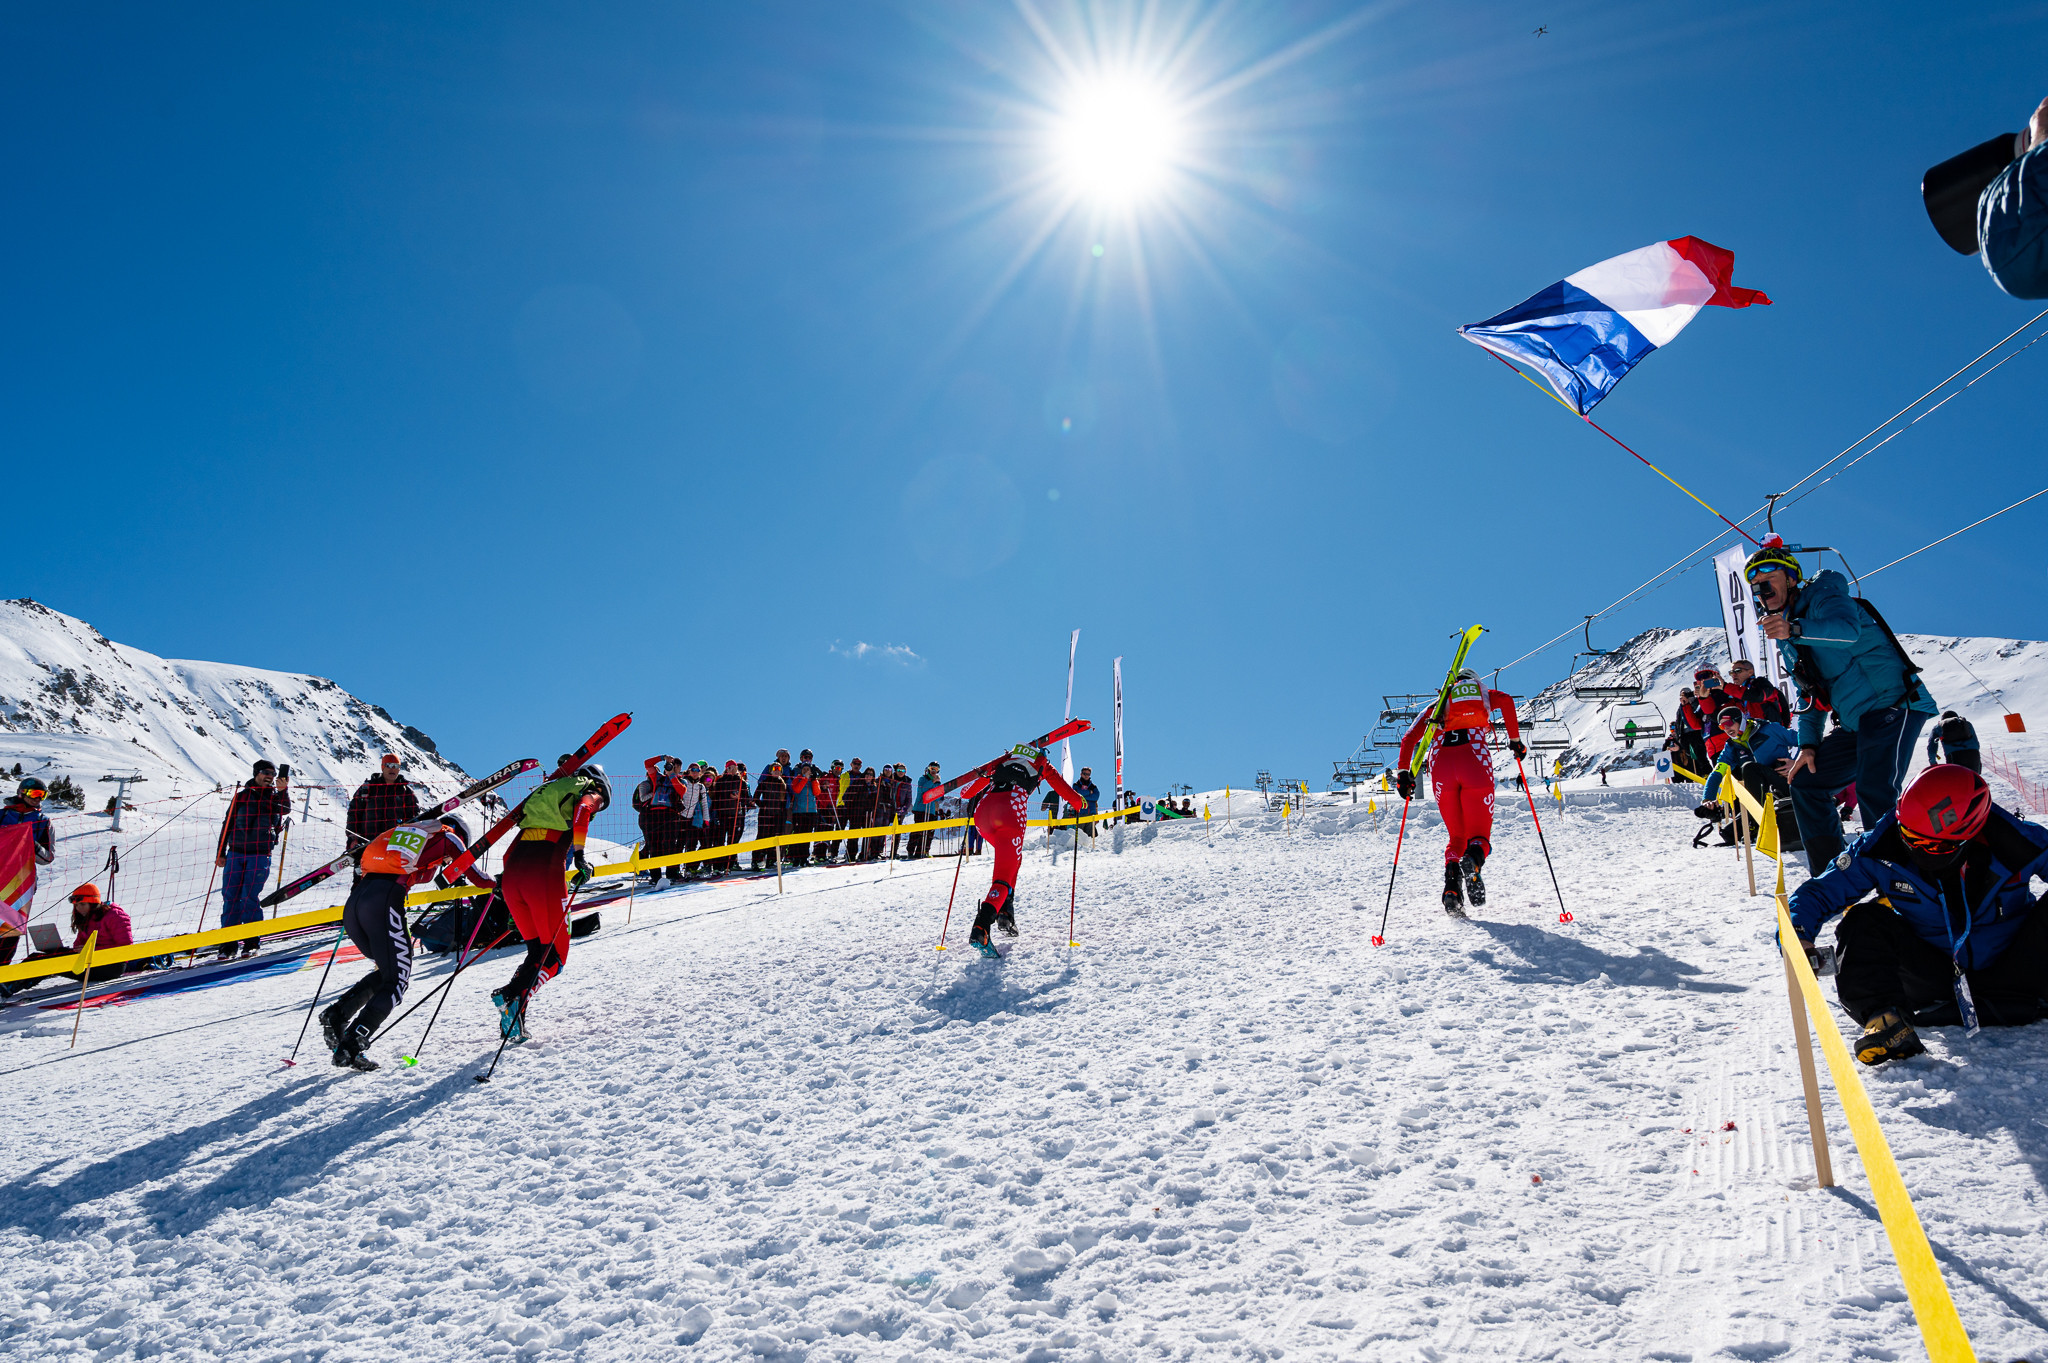 Sprint races opened the Ski Mountaineering World Championships at Boi Taull ©ISMF